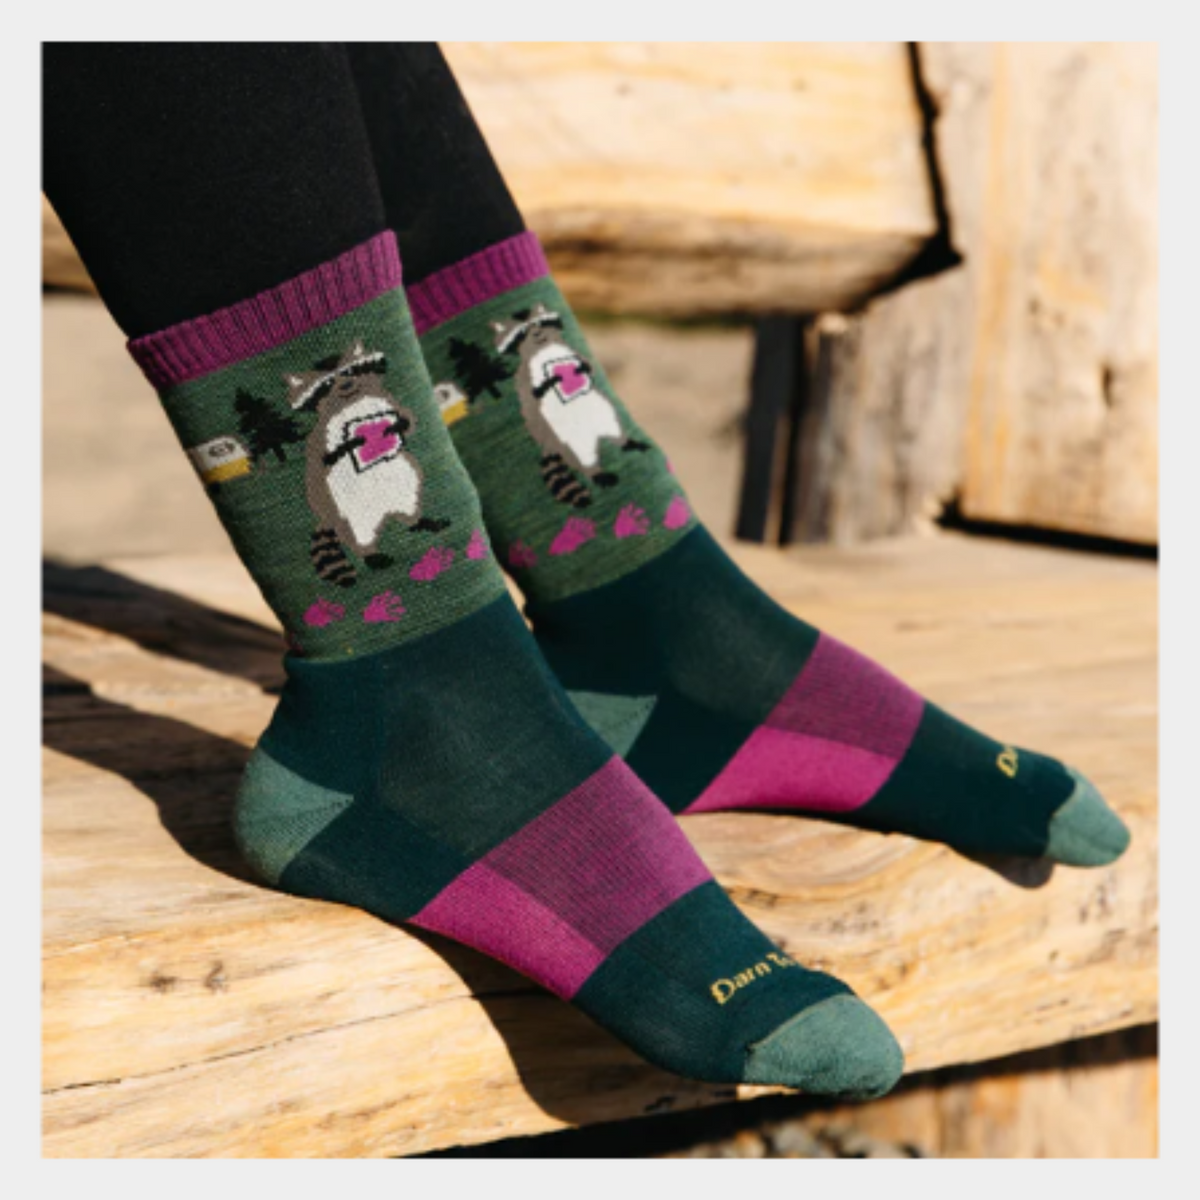 Darn Tough 5001 Critter Club Micro Crew Lightweight Hiking Women&#39;s Sock featuring green sock with purple cuff and raccoon holding jam sandwich. Sock shown on model&#39;s feet outside. 